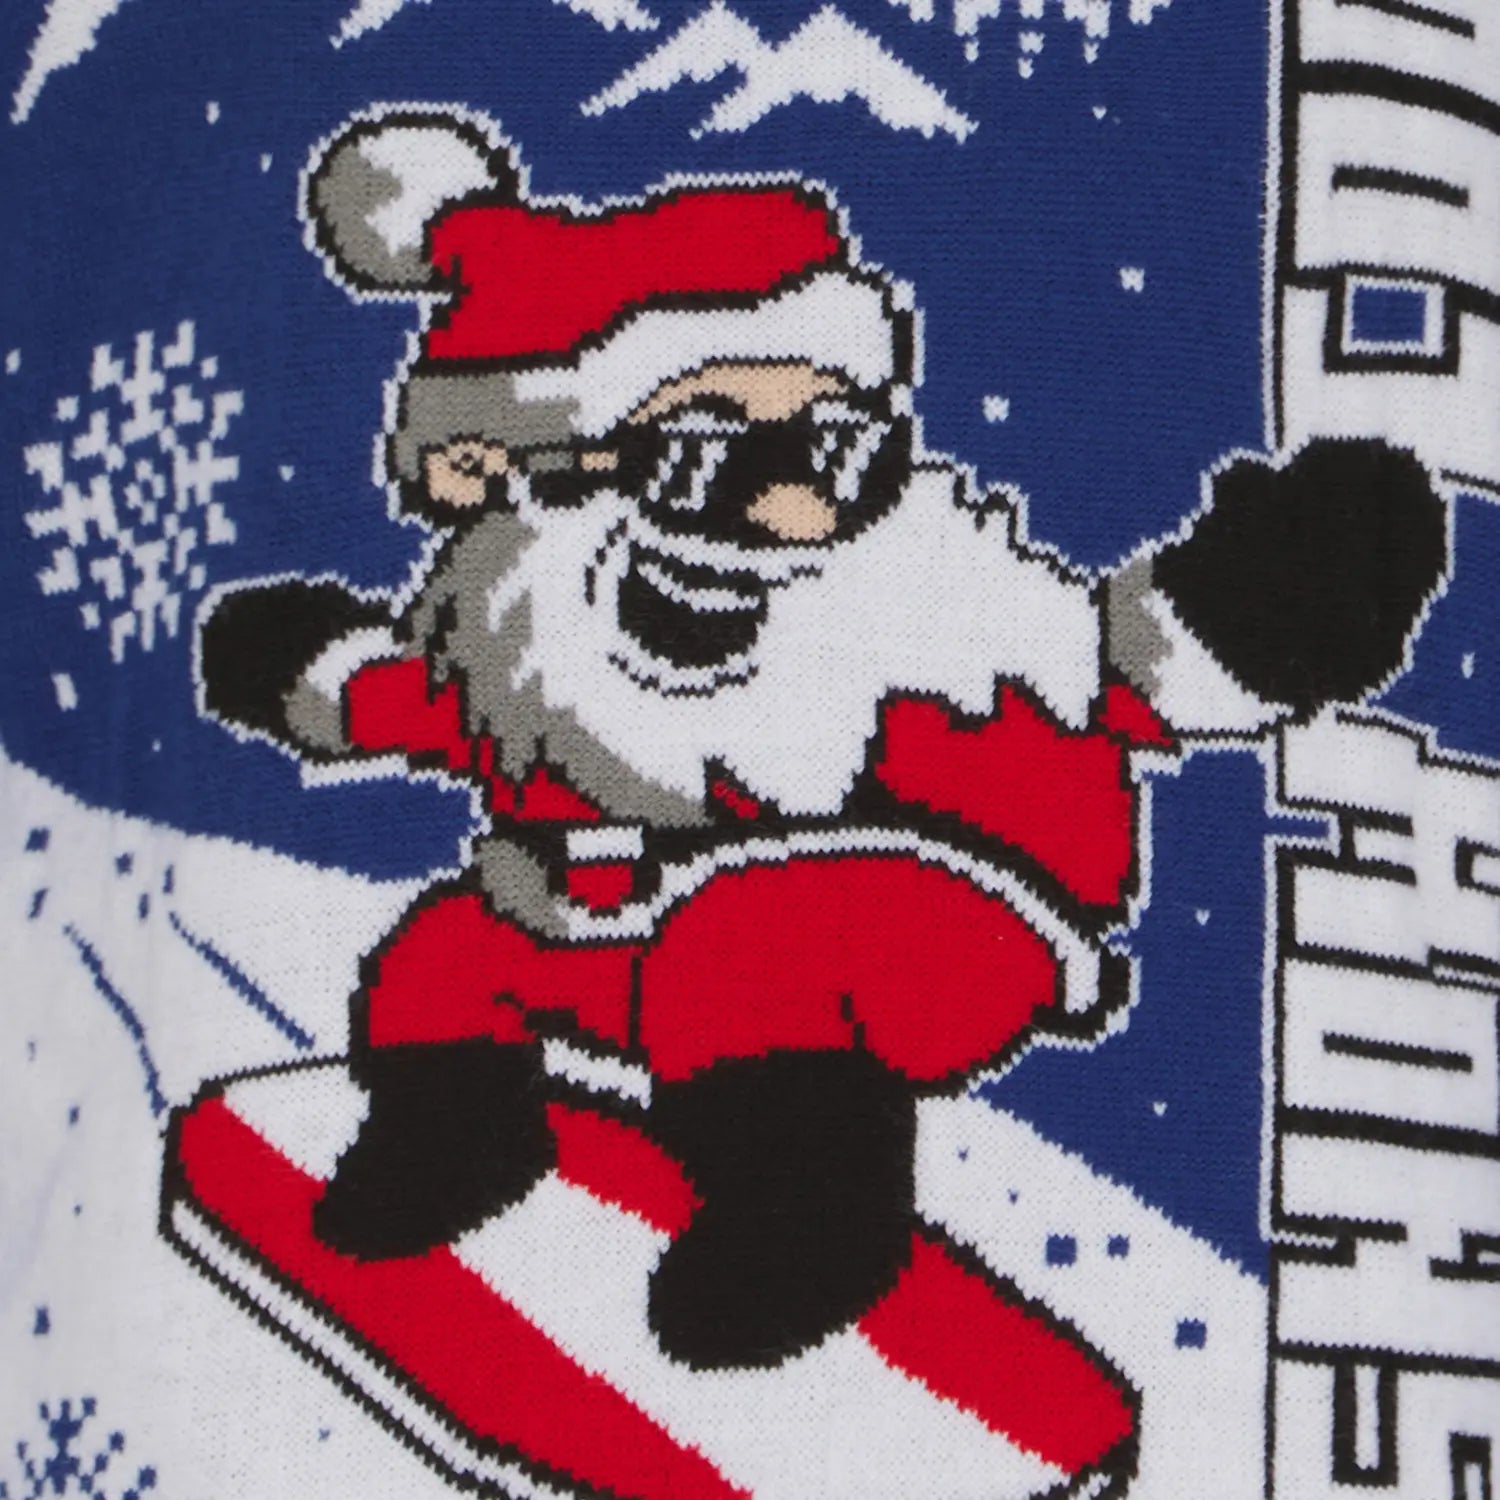 detail shot of vibrant red santa charcater on snowboard featuring red and white stripes